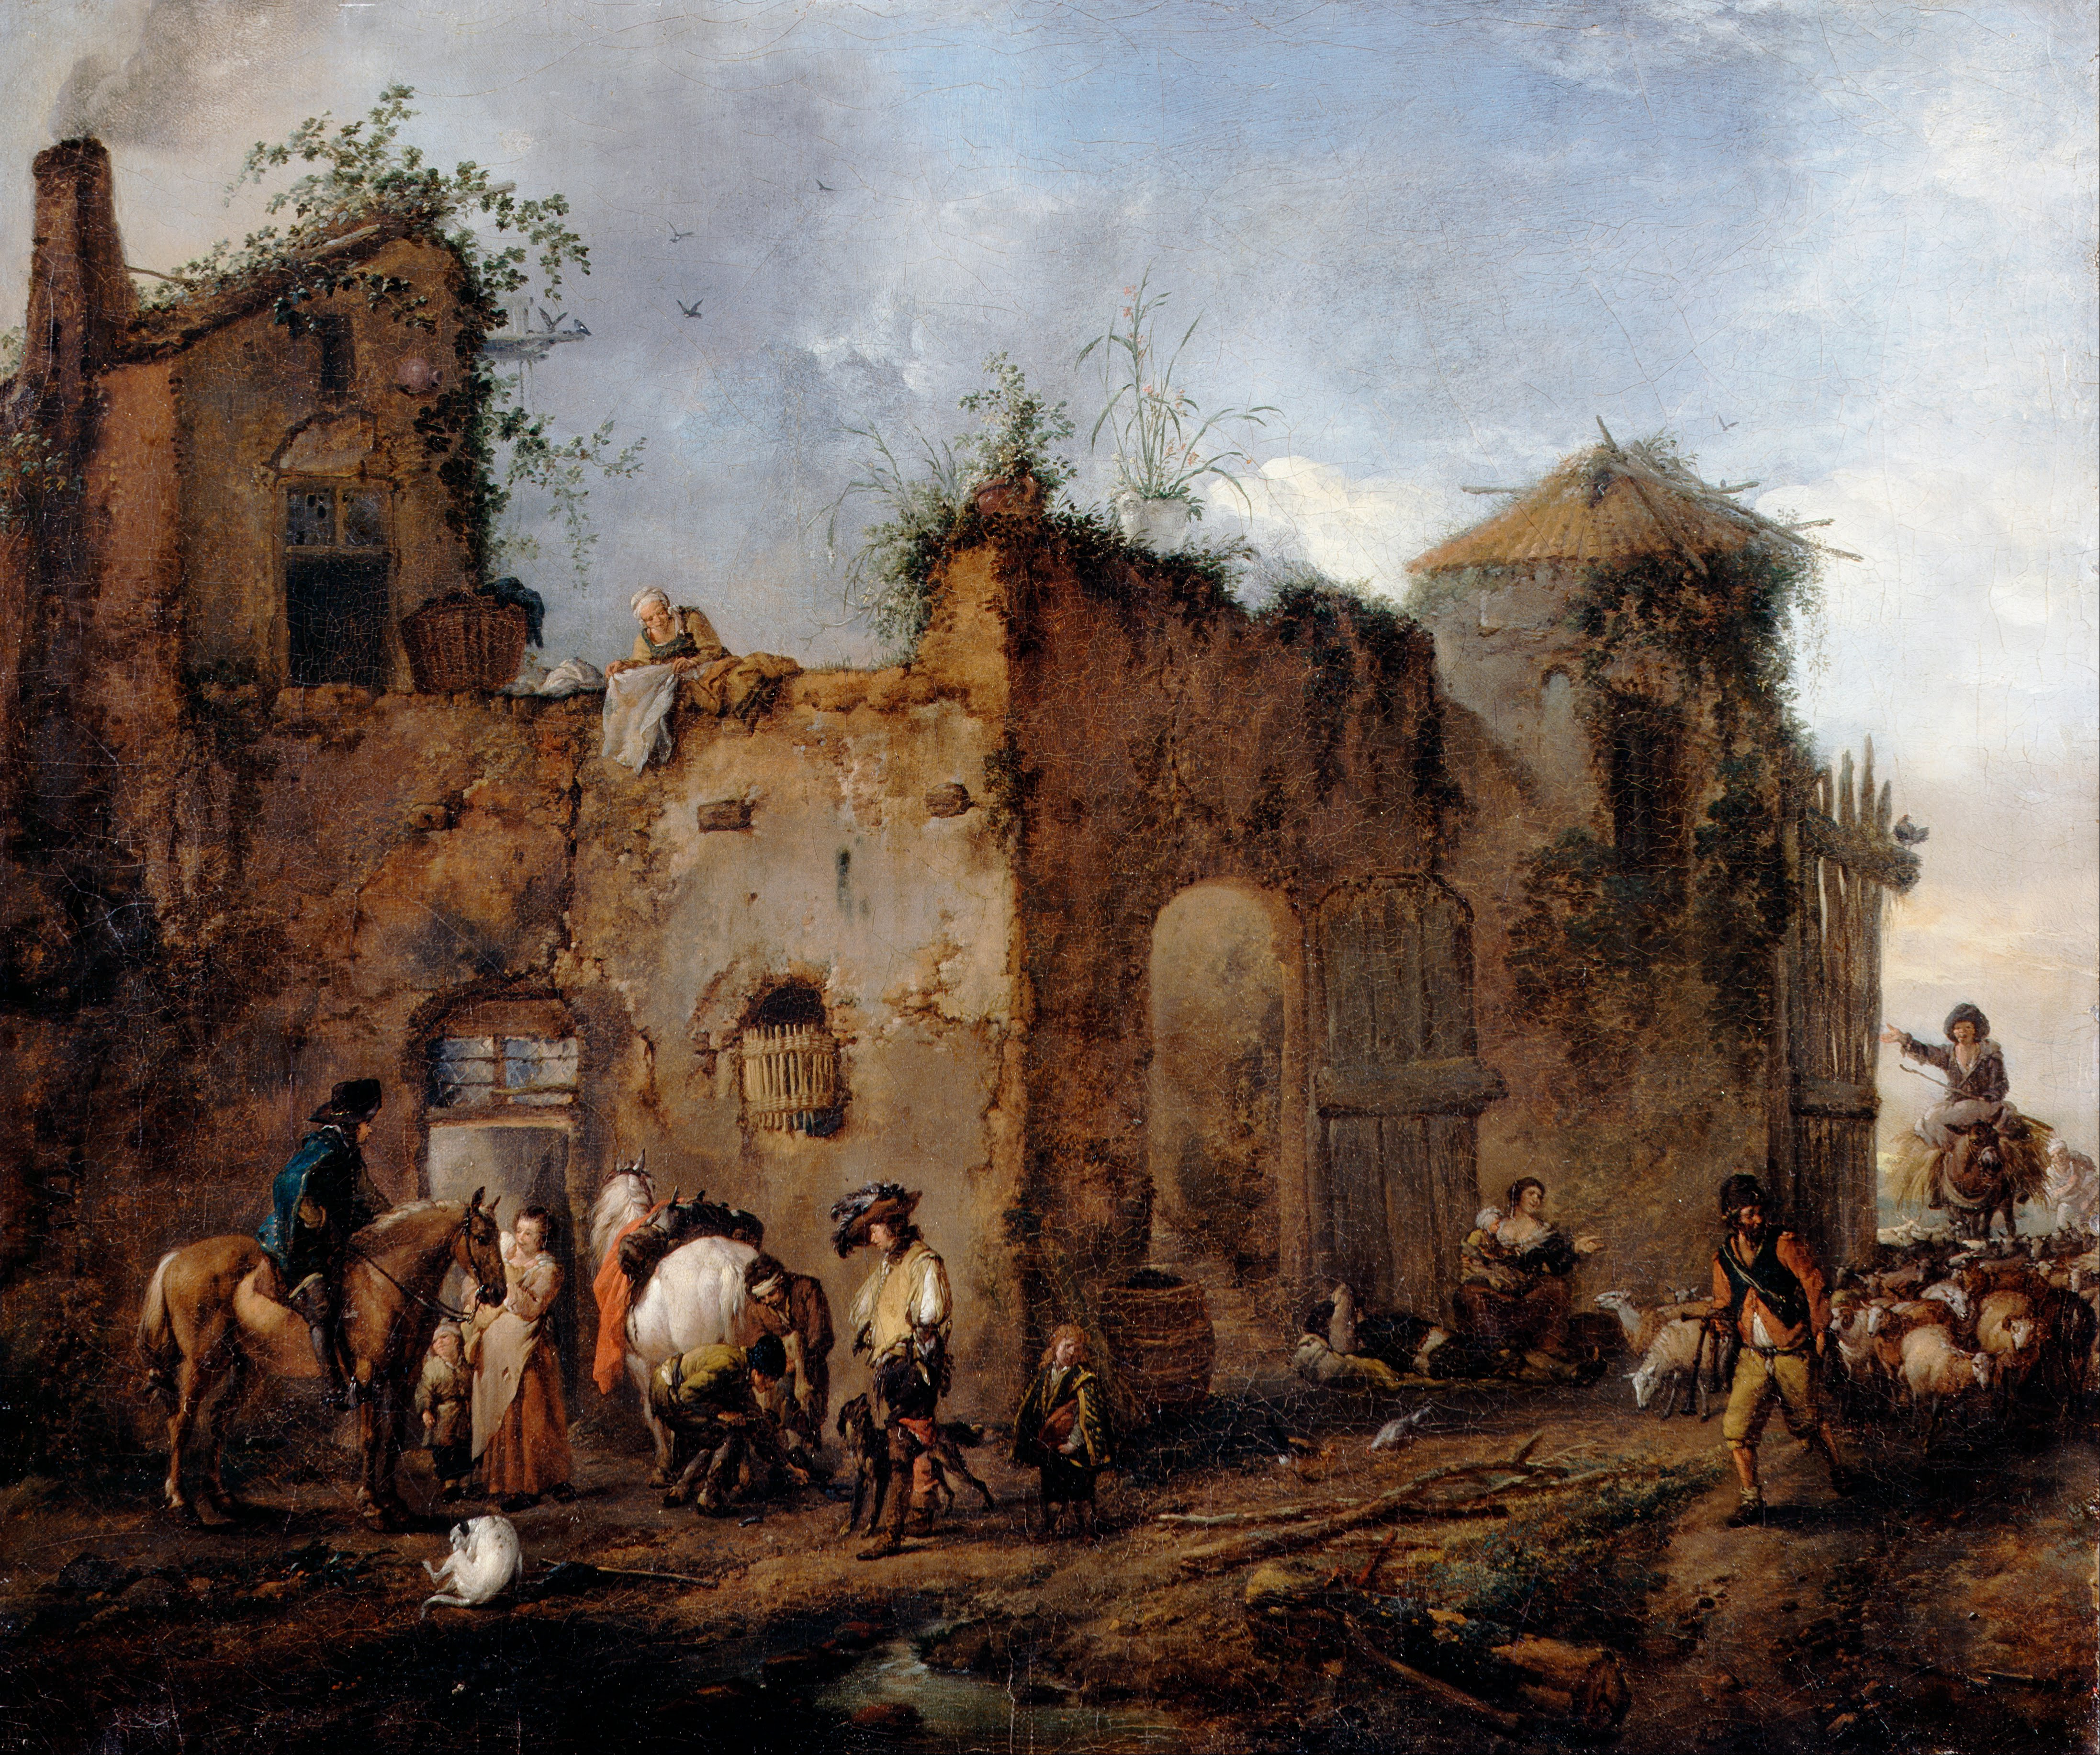 Wouwerman, Philips - Courtyard with a Farrier shoeing a Horse - Google Art Project